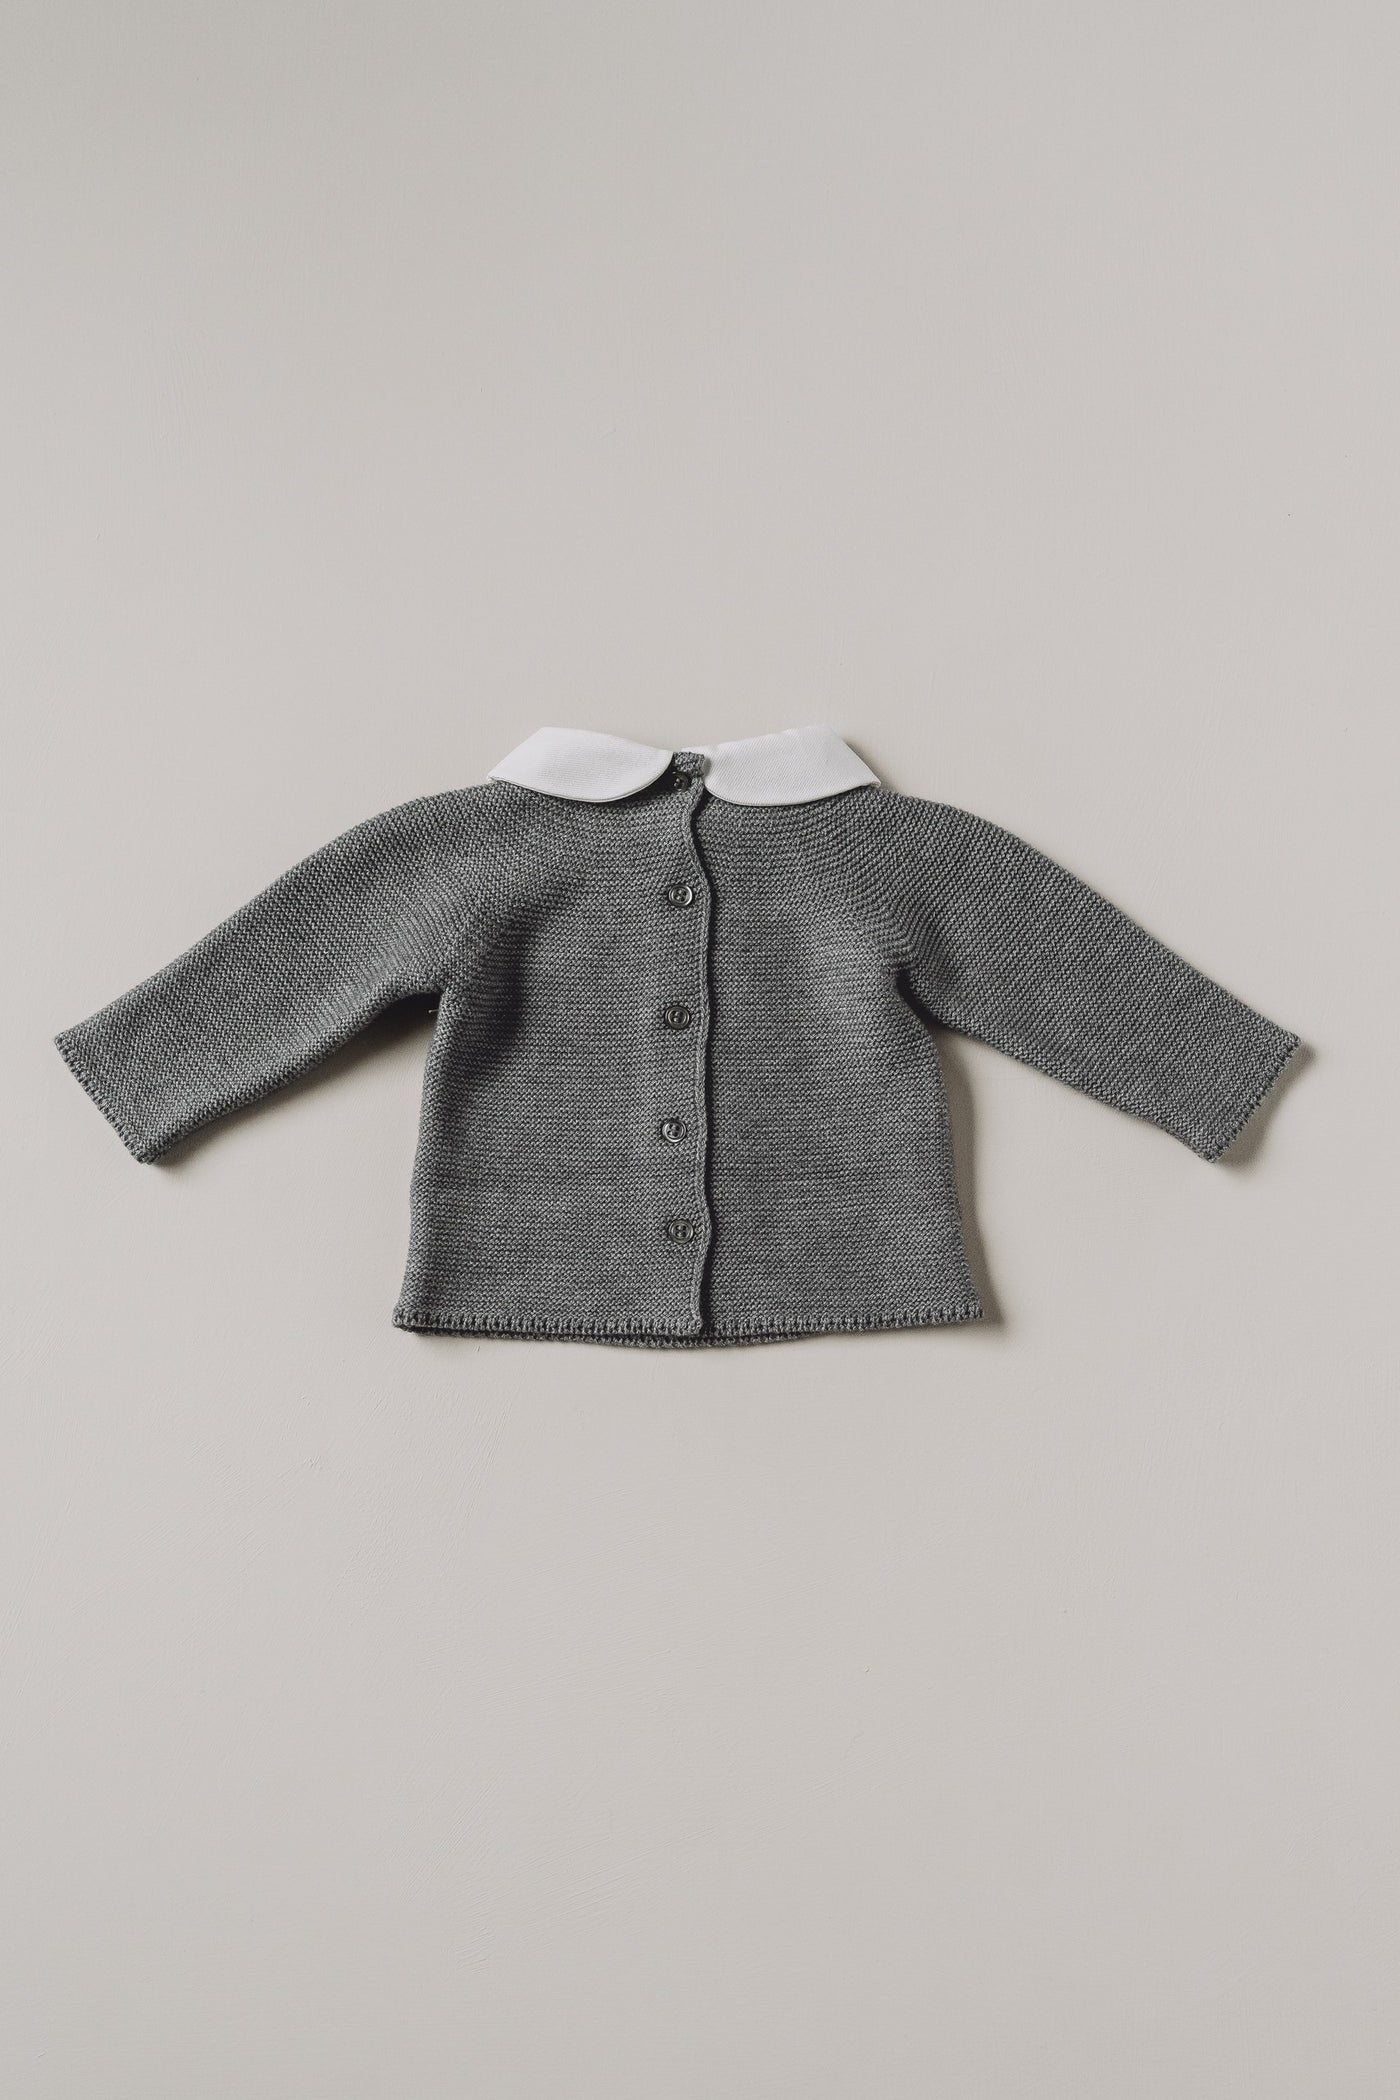 Baby Boy's Gray 2-Piece Knitted Soft Set